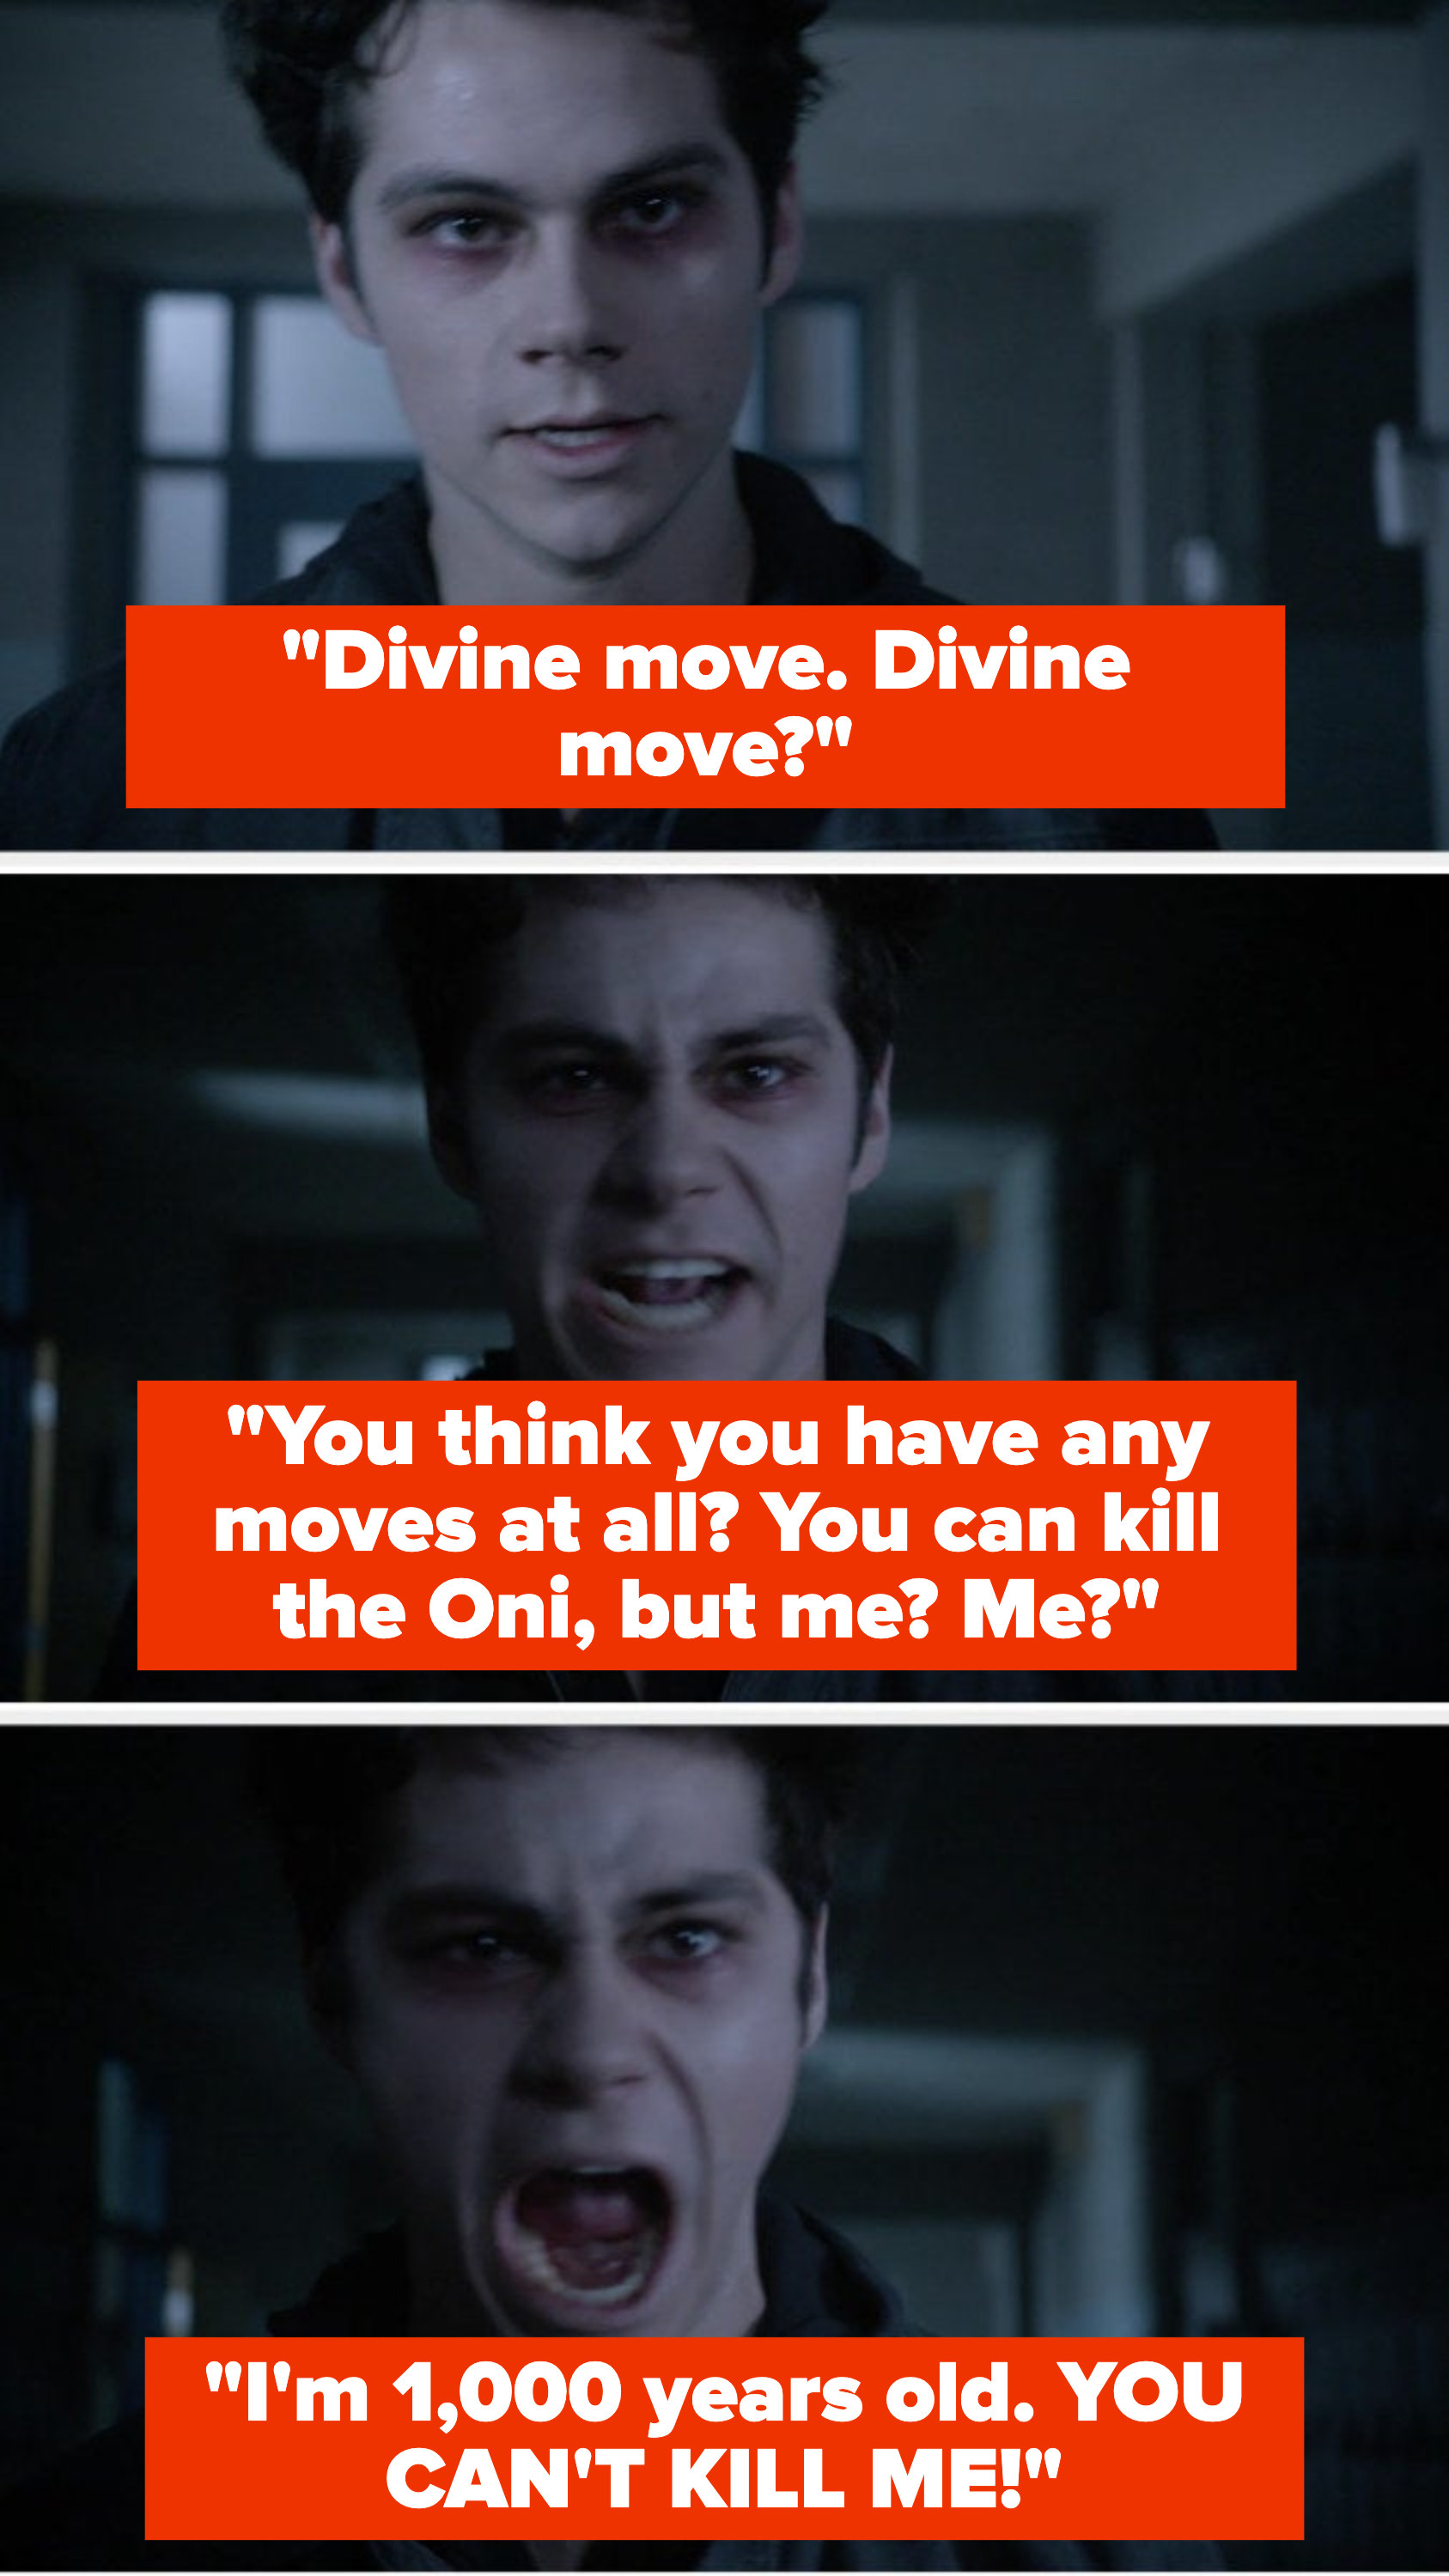 The Nogitsune yells &quot;Divine move, divine move? You think you have any moves at all? You can kill the Oni, but me? Me? I&#x27;m 1,000 years old. You can&#x27;t kill me!&quot;